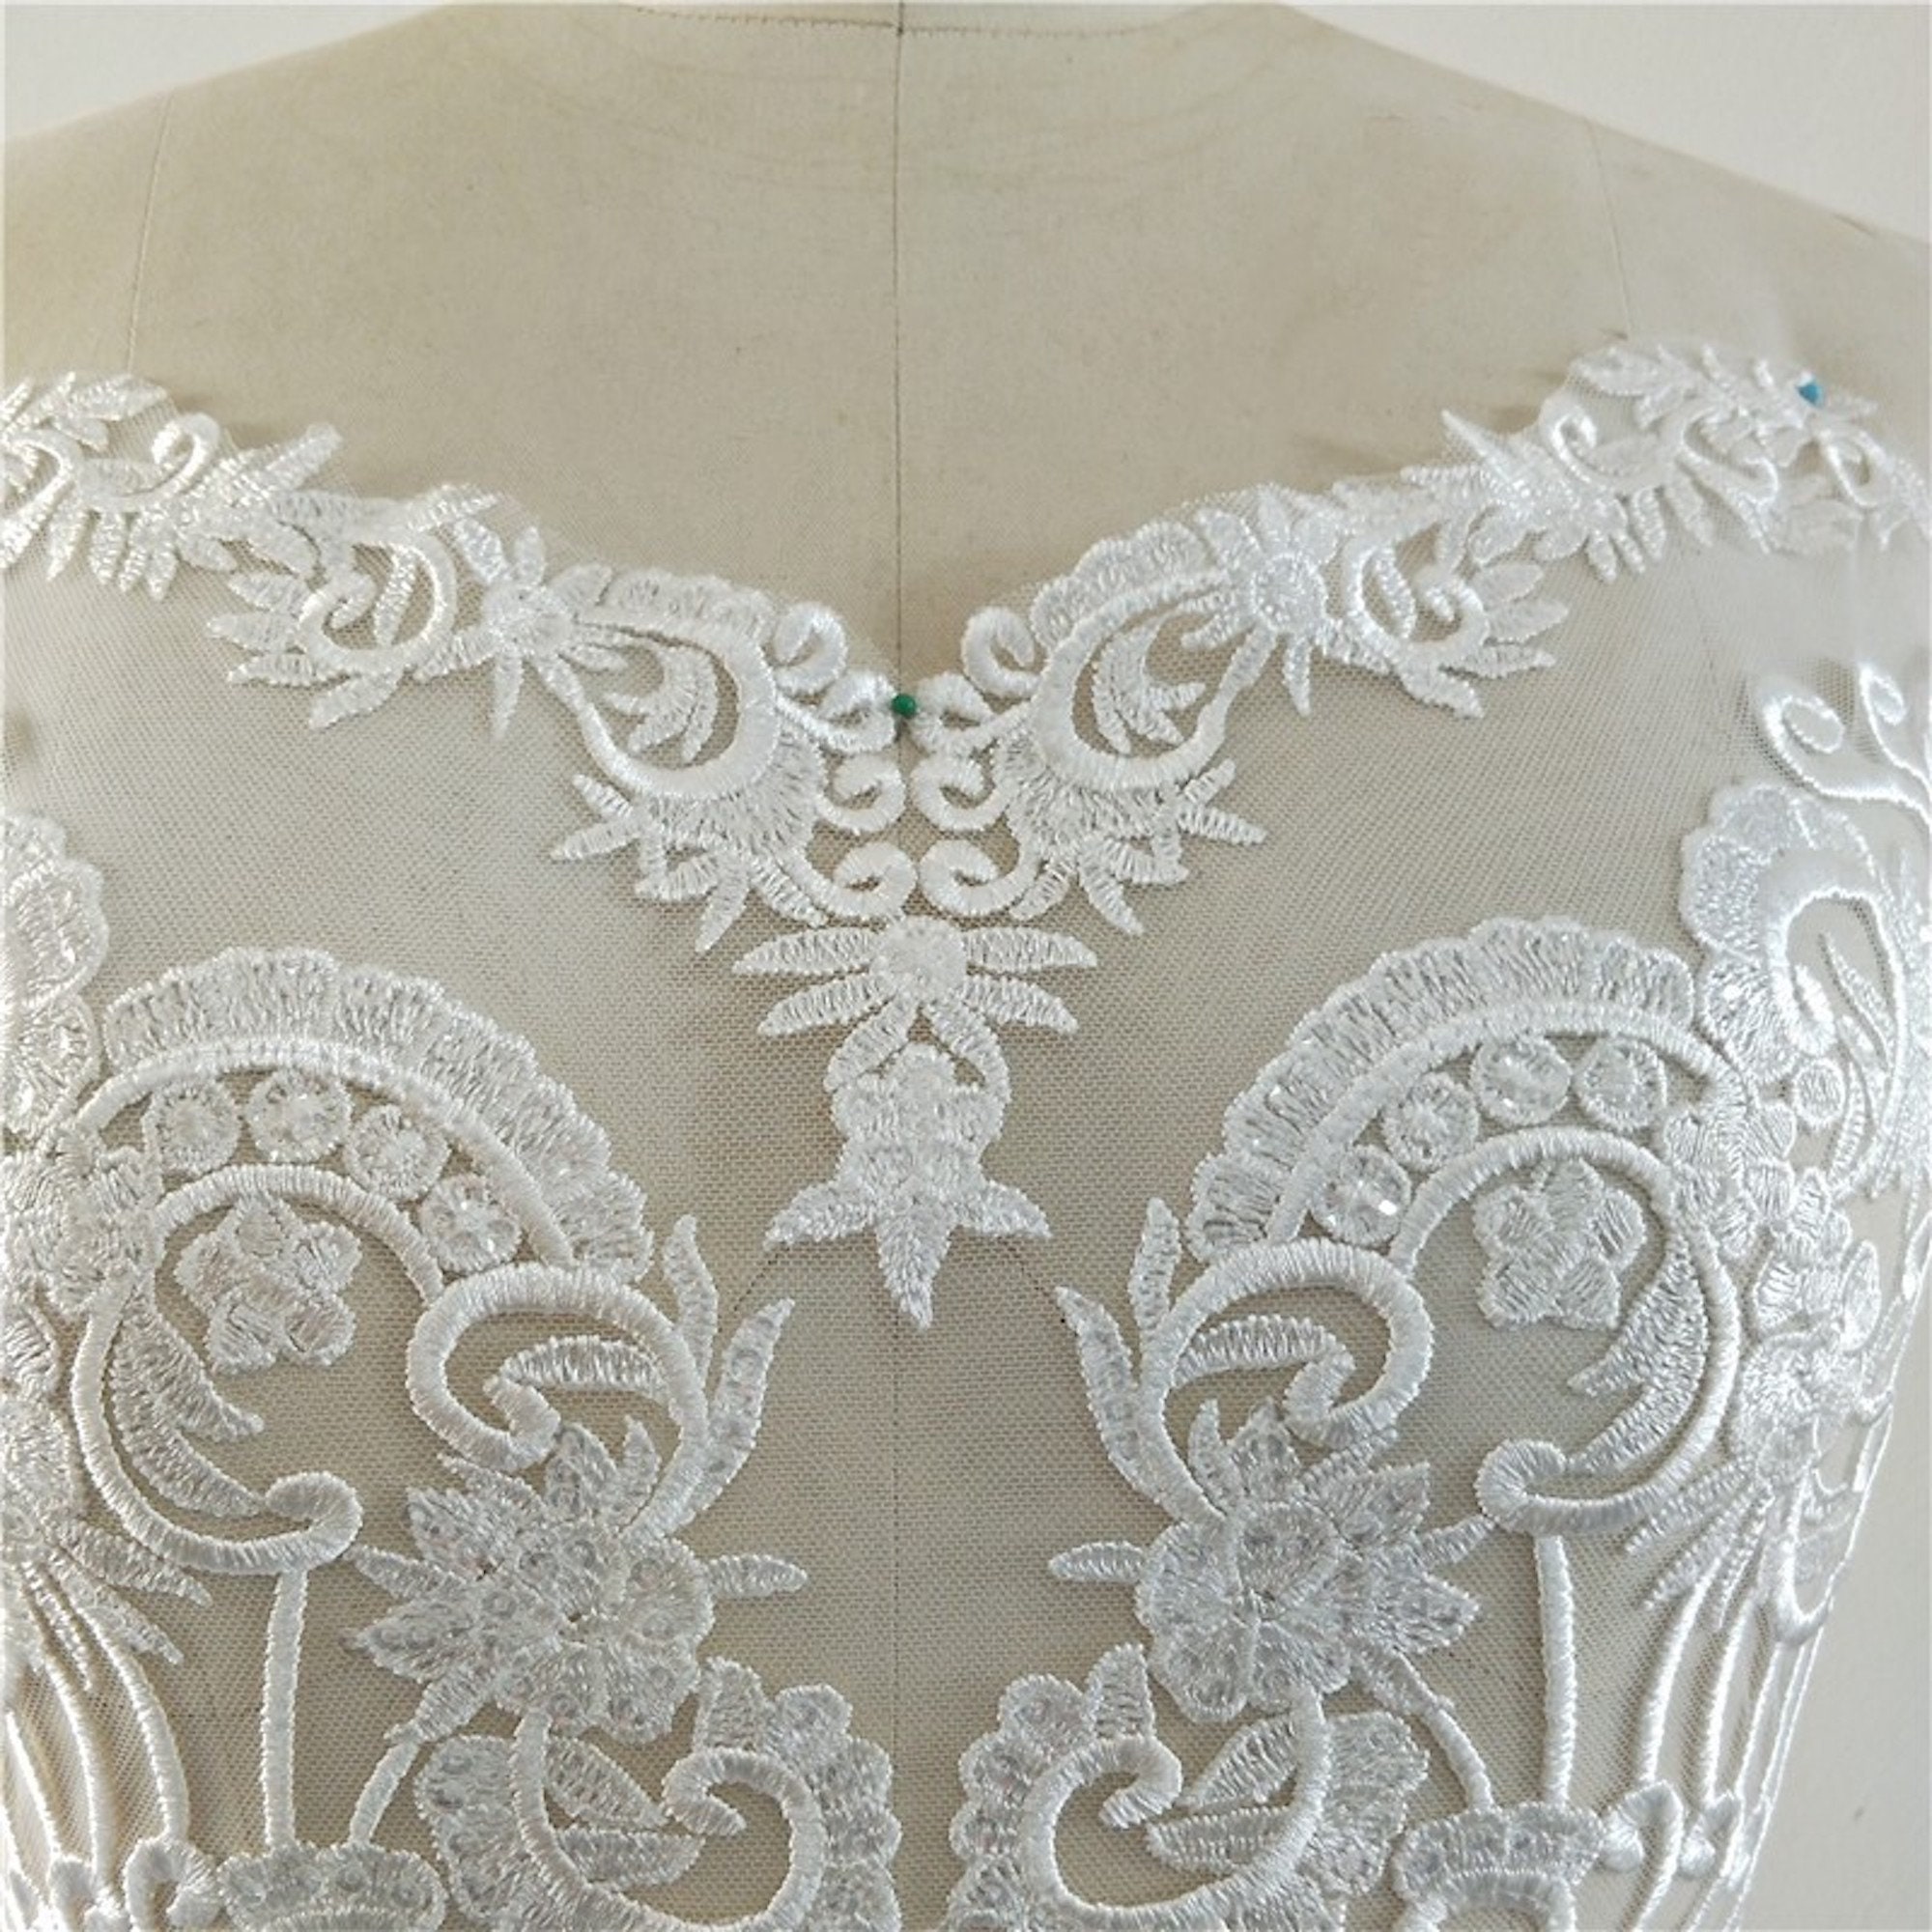 Exquisite Clear Sequin Leaf Embroidery Bridal Lace Applique - Etsy